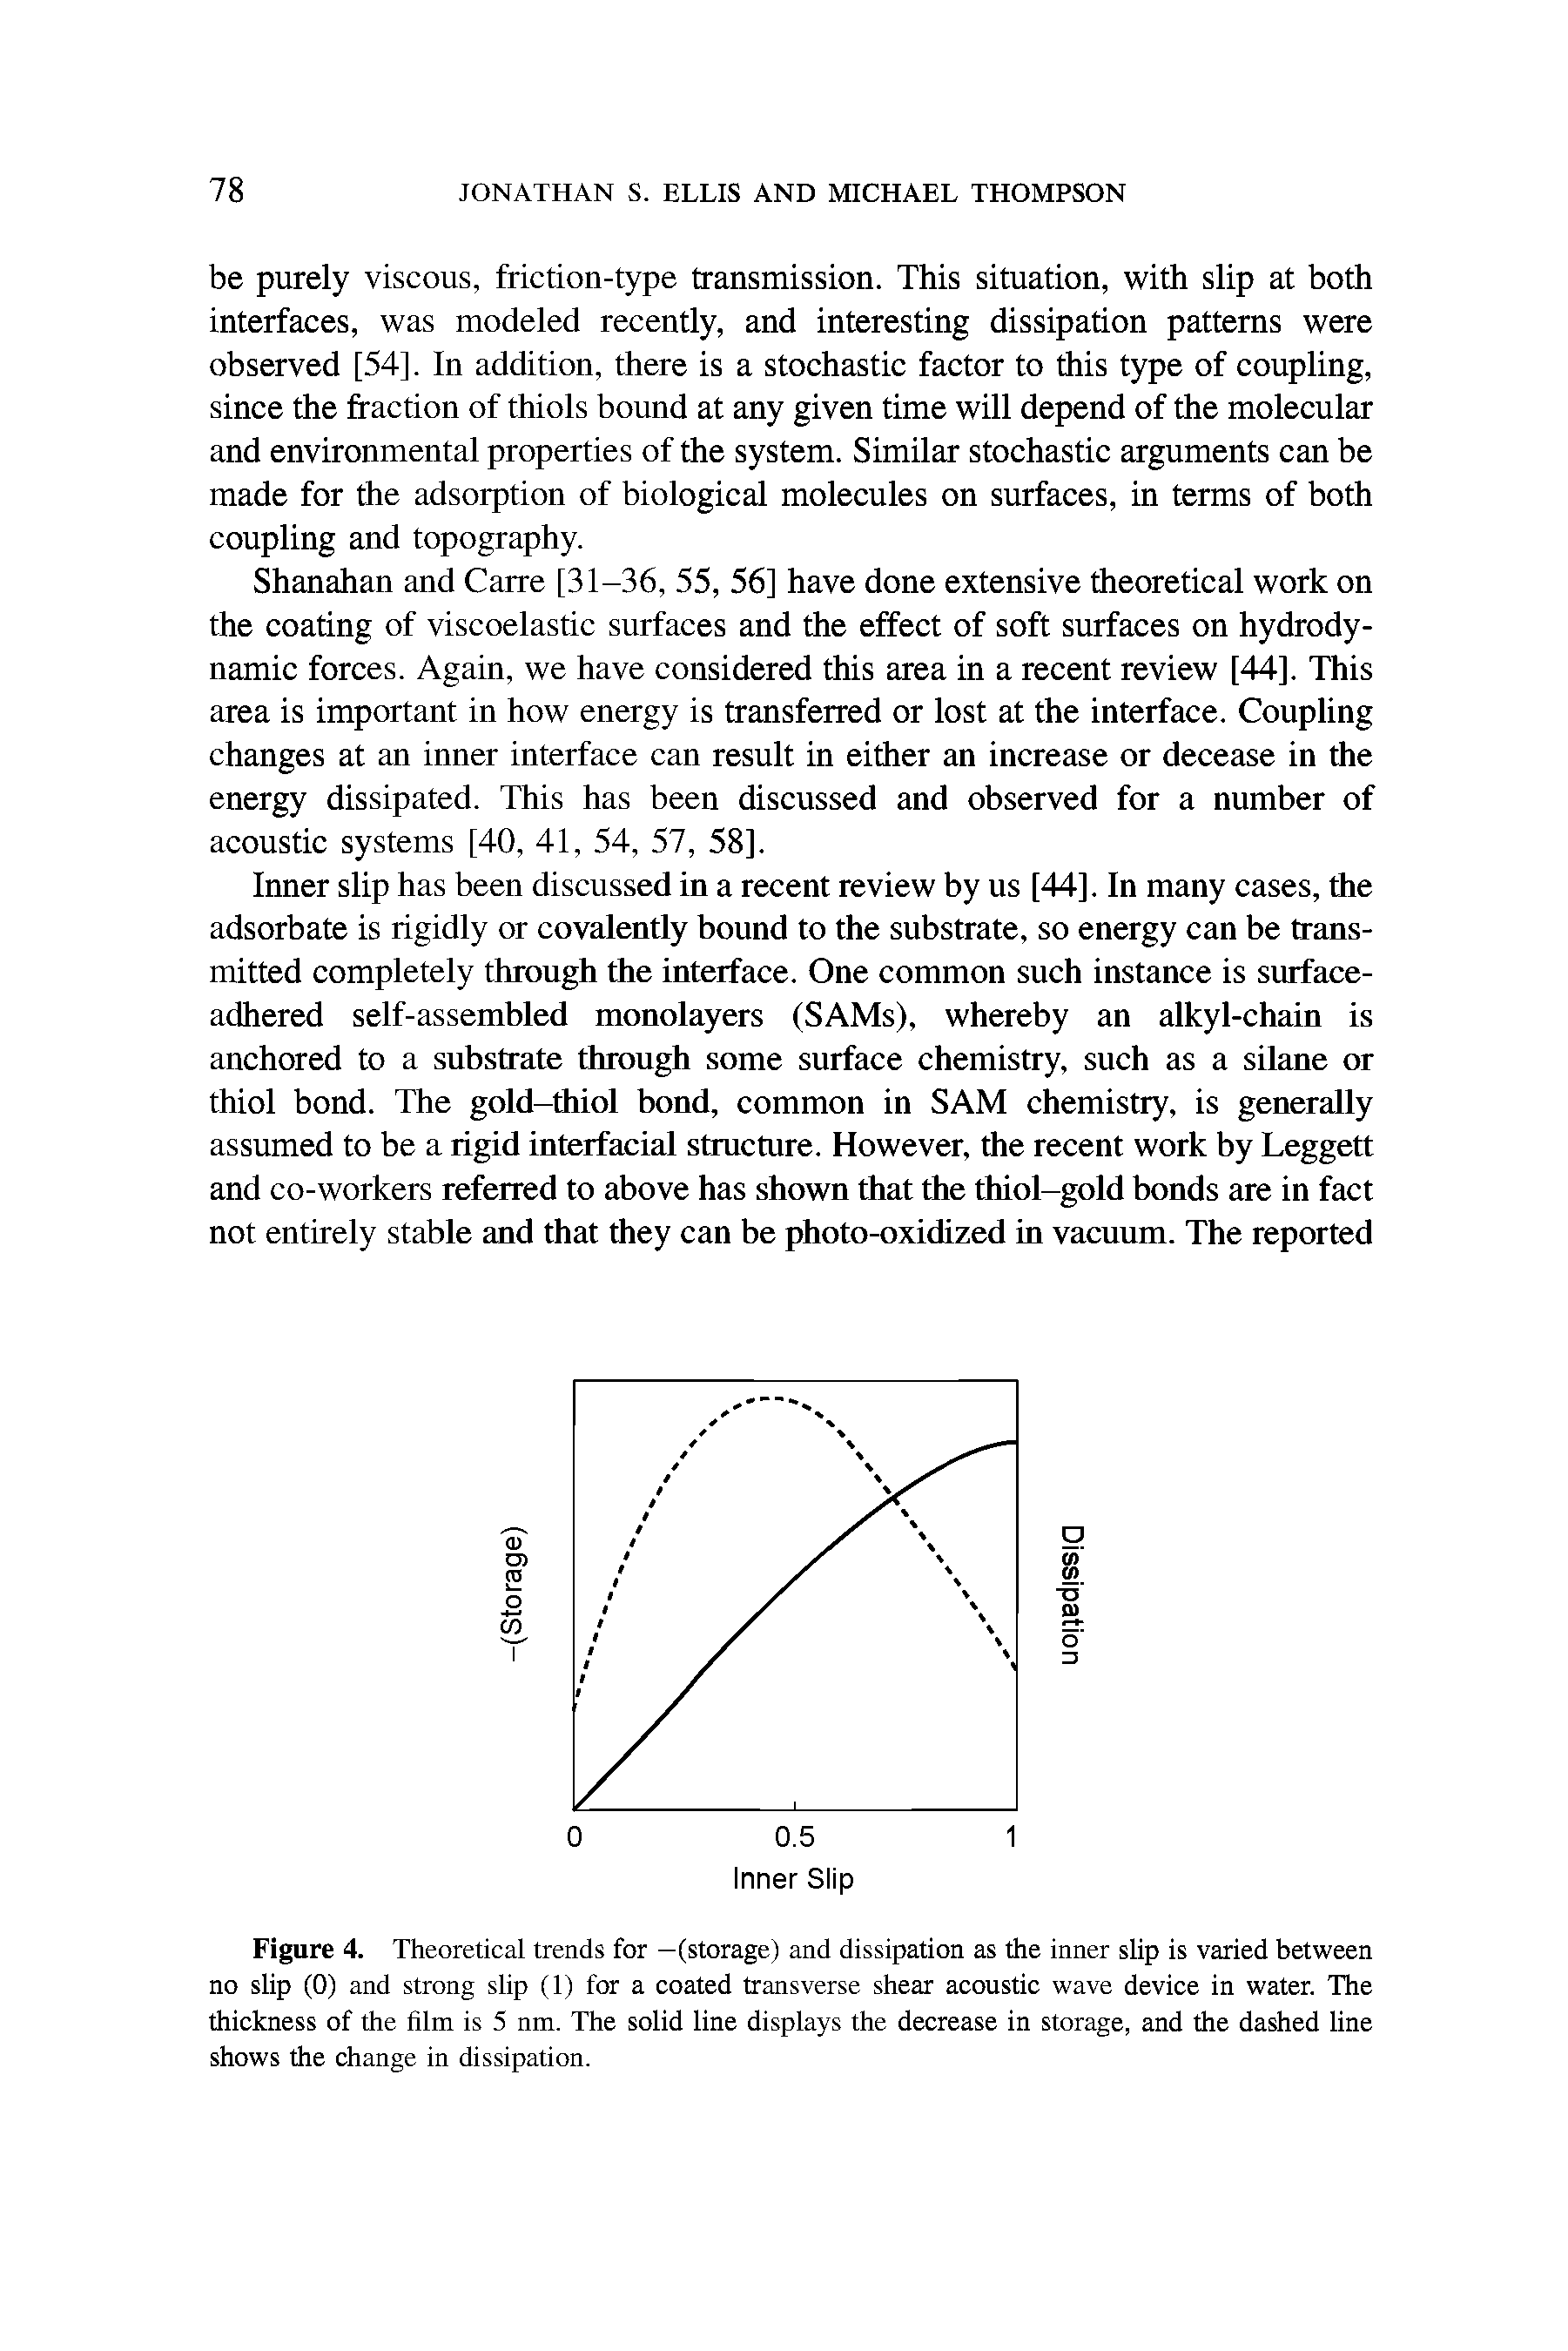 Figure 4. Theoretical trends for —(storage) and dissipation as the inner slip is varied between no slip (0) and strong slip (1) for a coated transverse shear acoustic wave device in water. The thickness of the film is 5 nm. The solid line displays the decrease in storage, and the dashed line shows the change in dissipation.